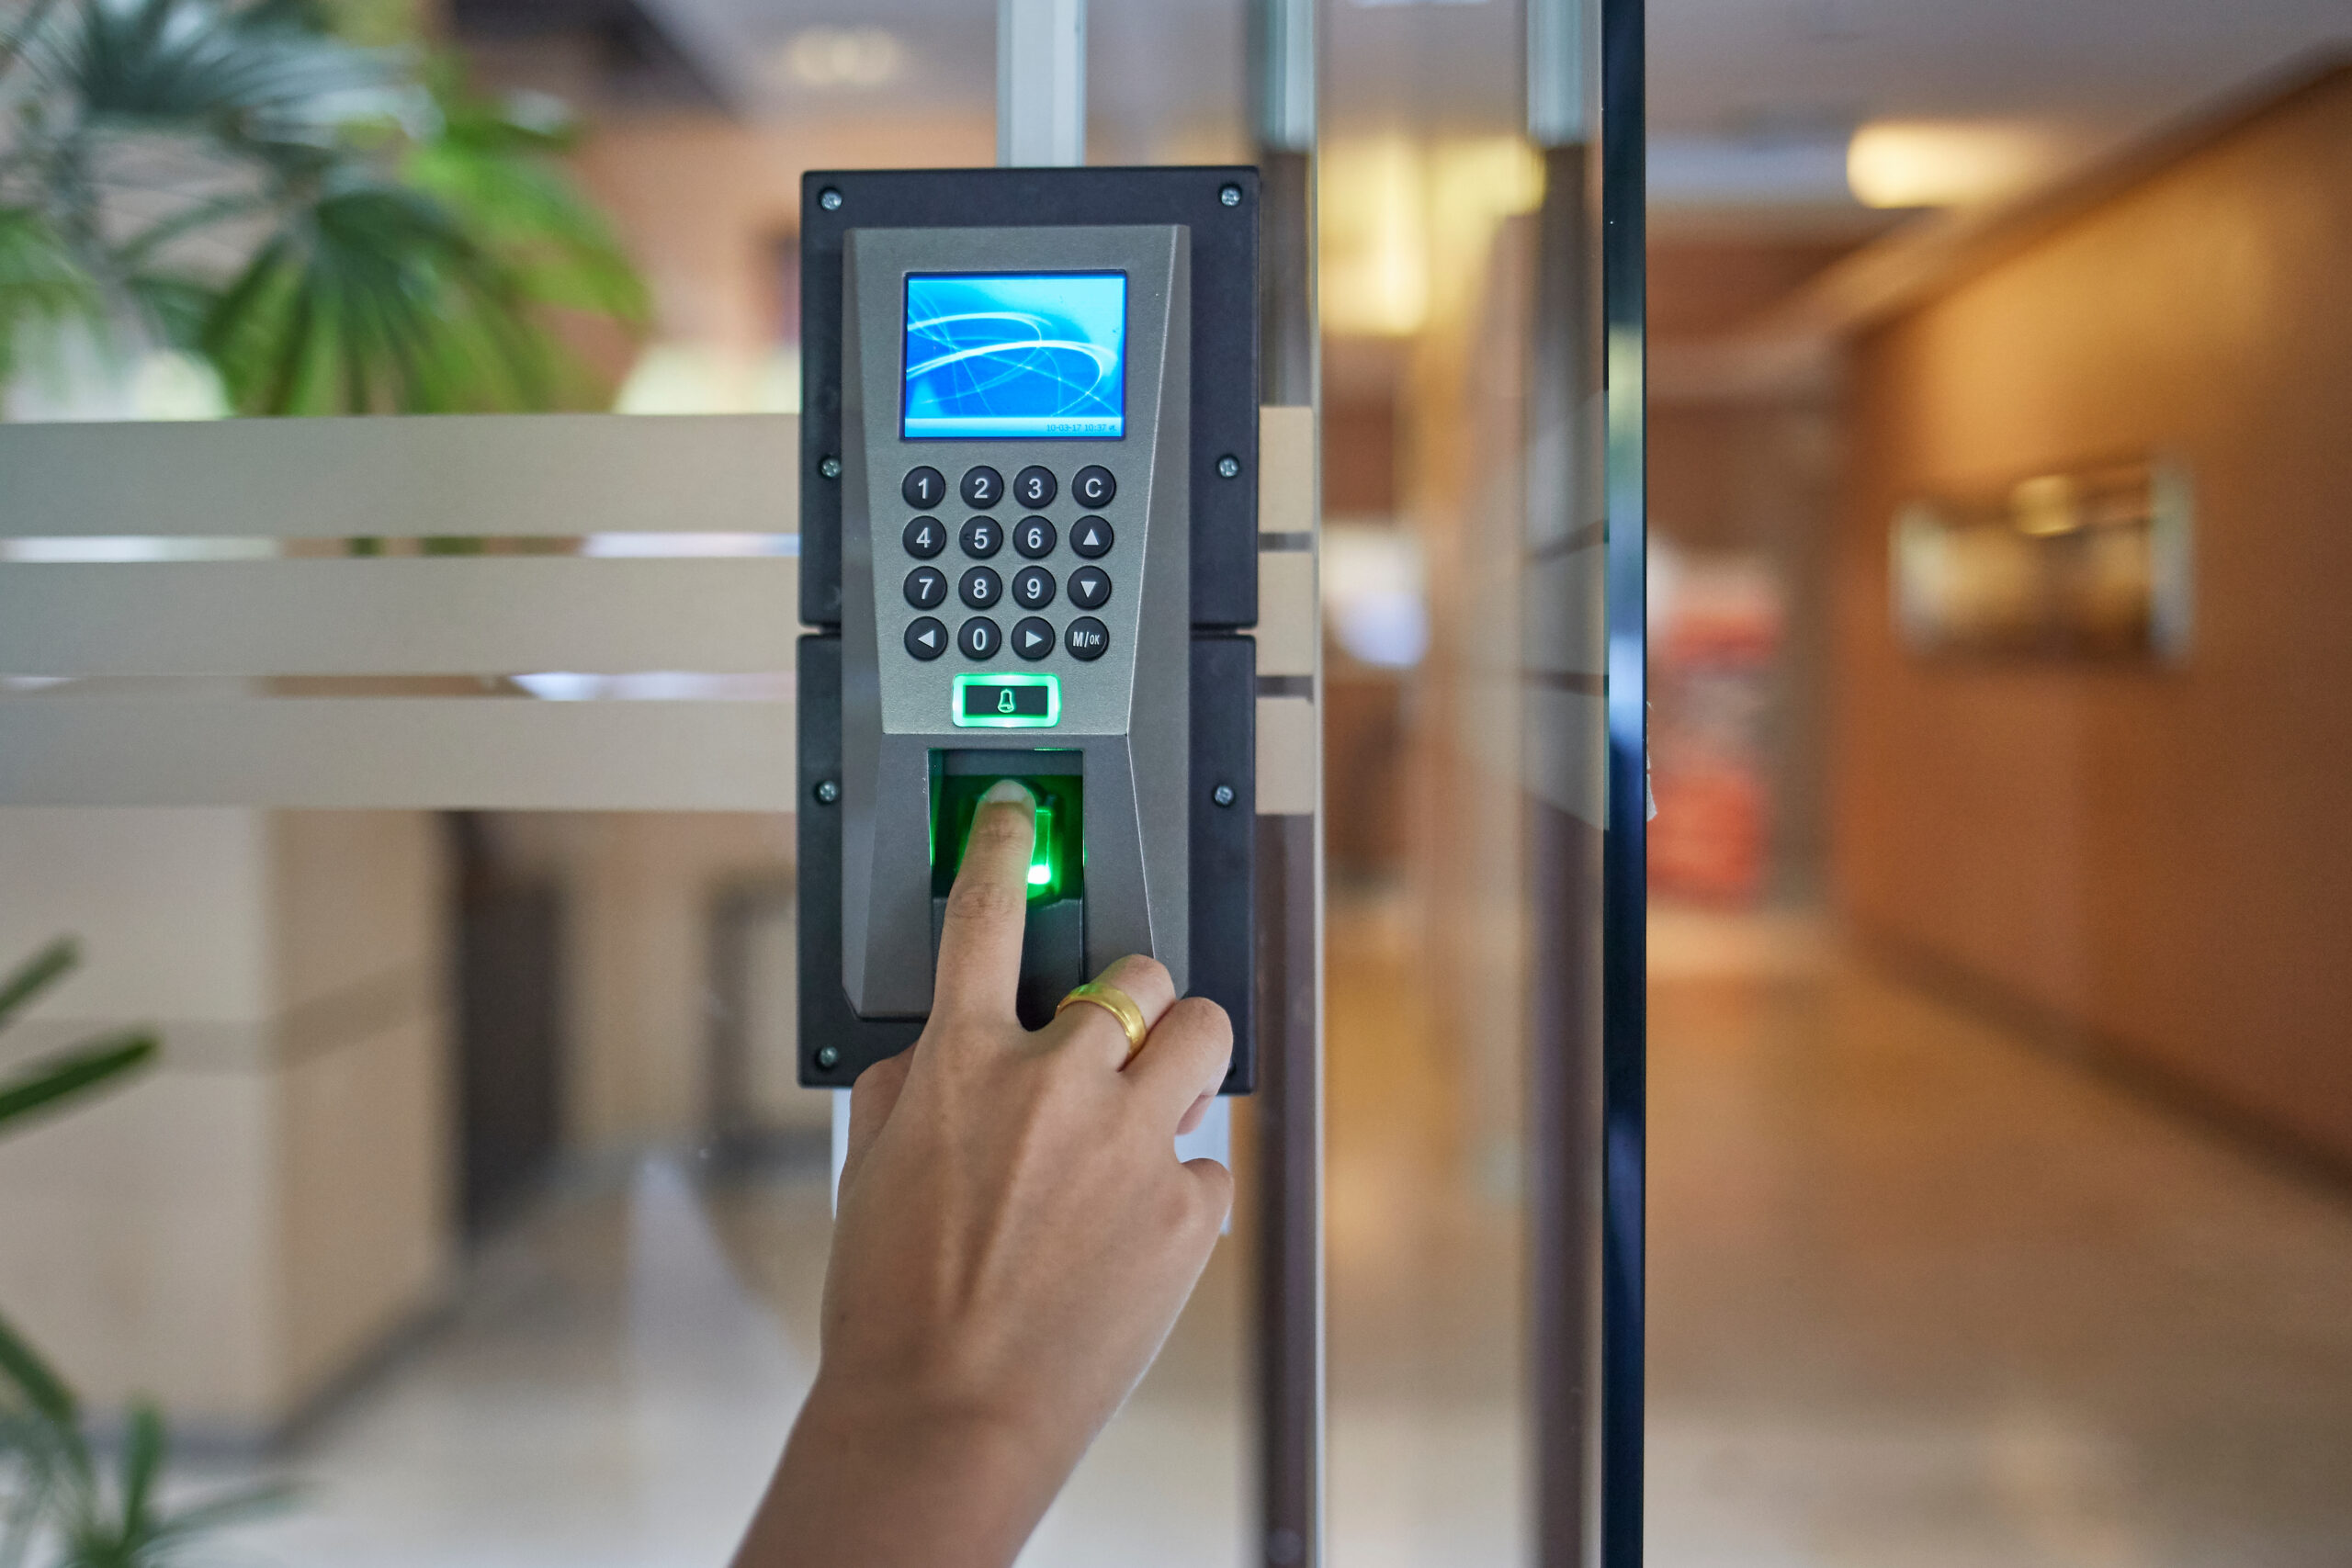 What is Access Control?